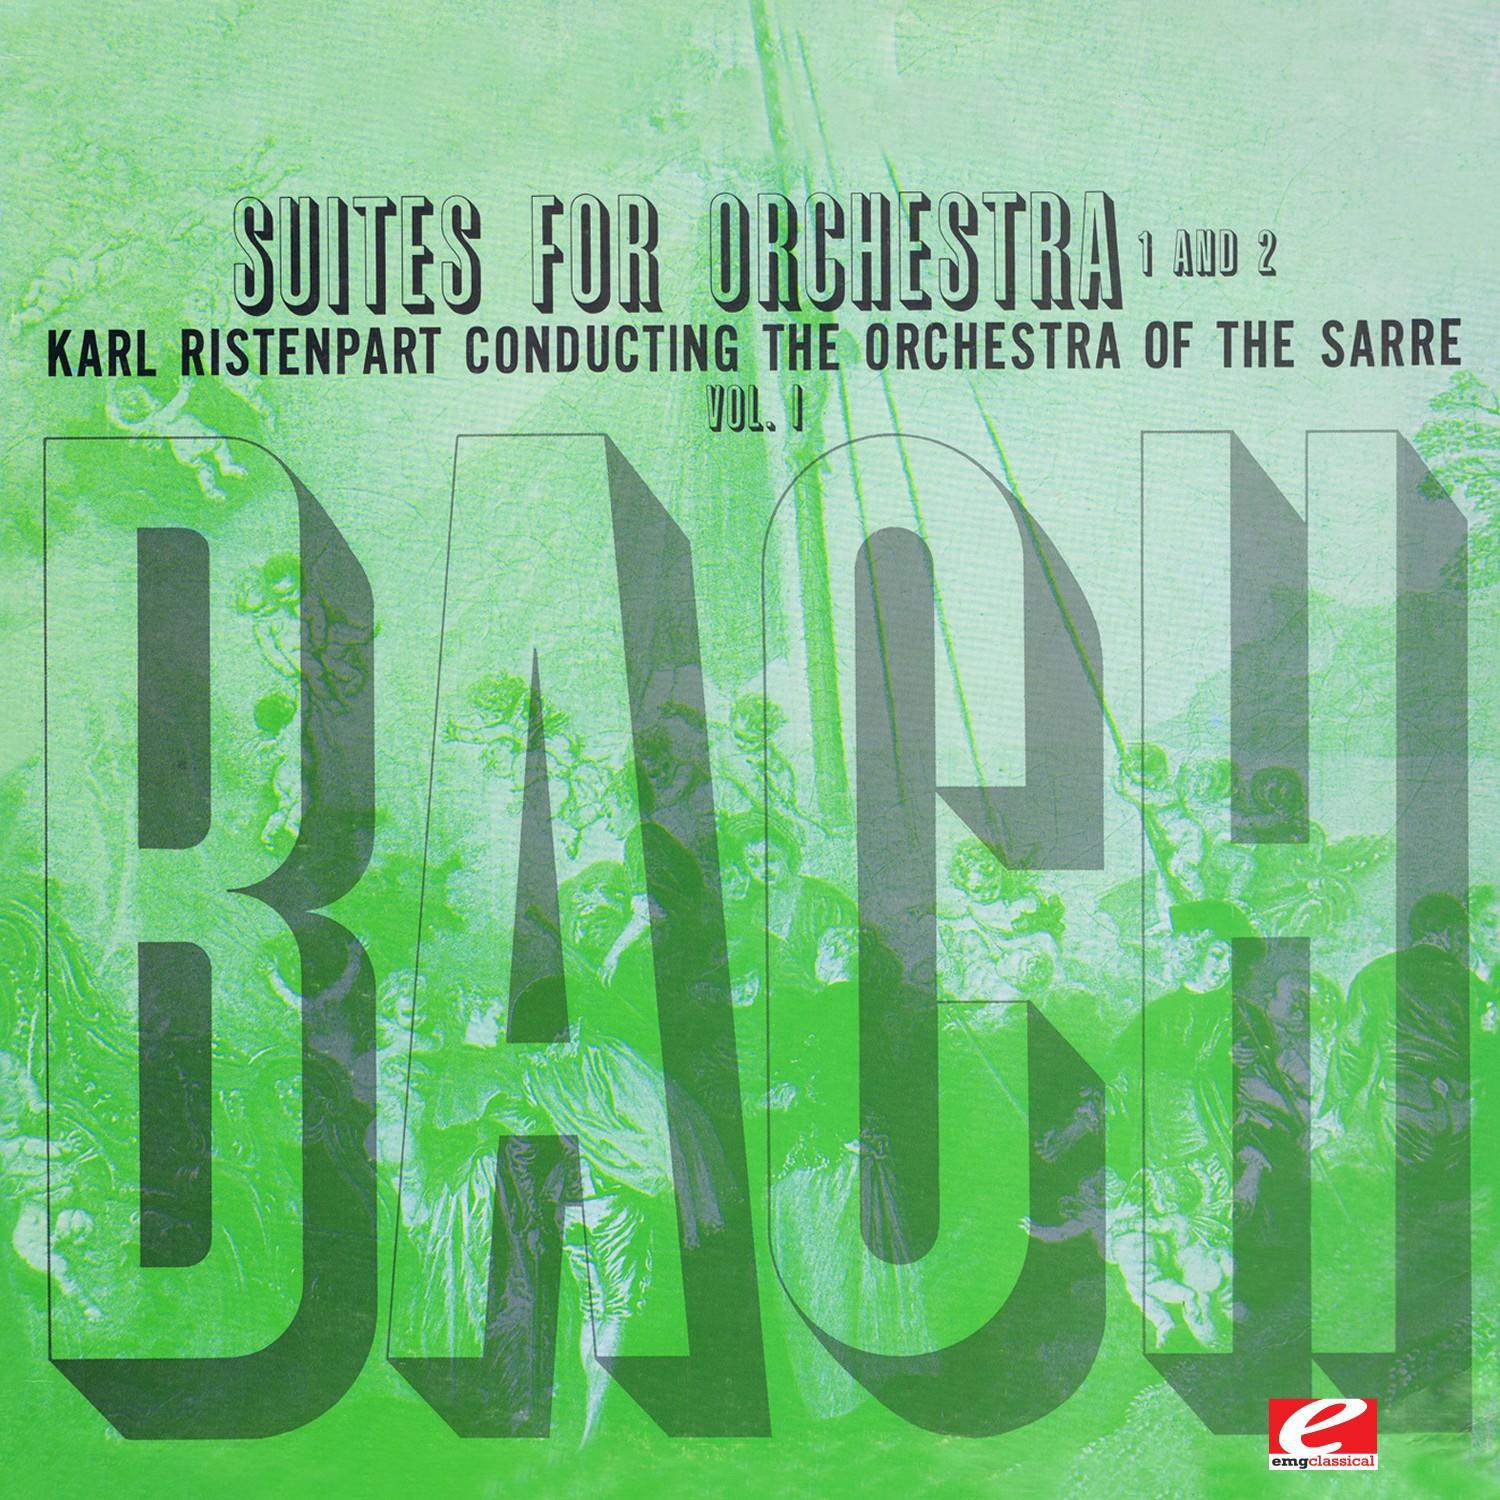 Bach: Suite for Orchestra No. 1 in C Major, BMV 1066 & Suite for Orchestra No. 2 in B Minor, BMV 106专辑